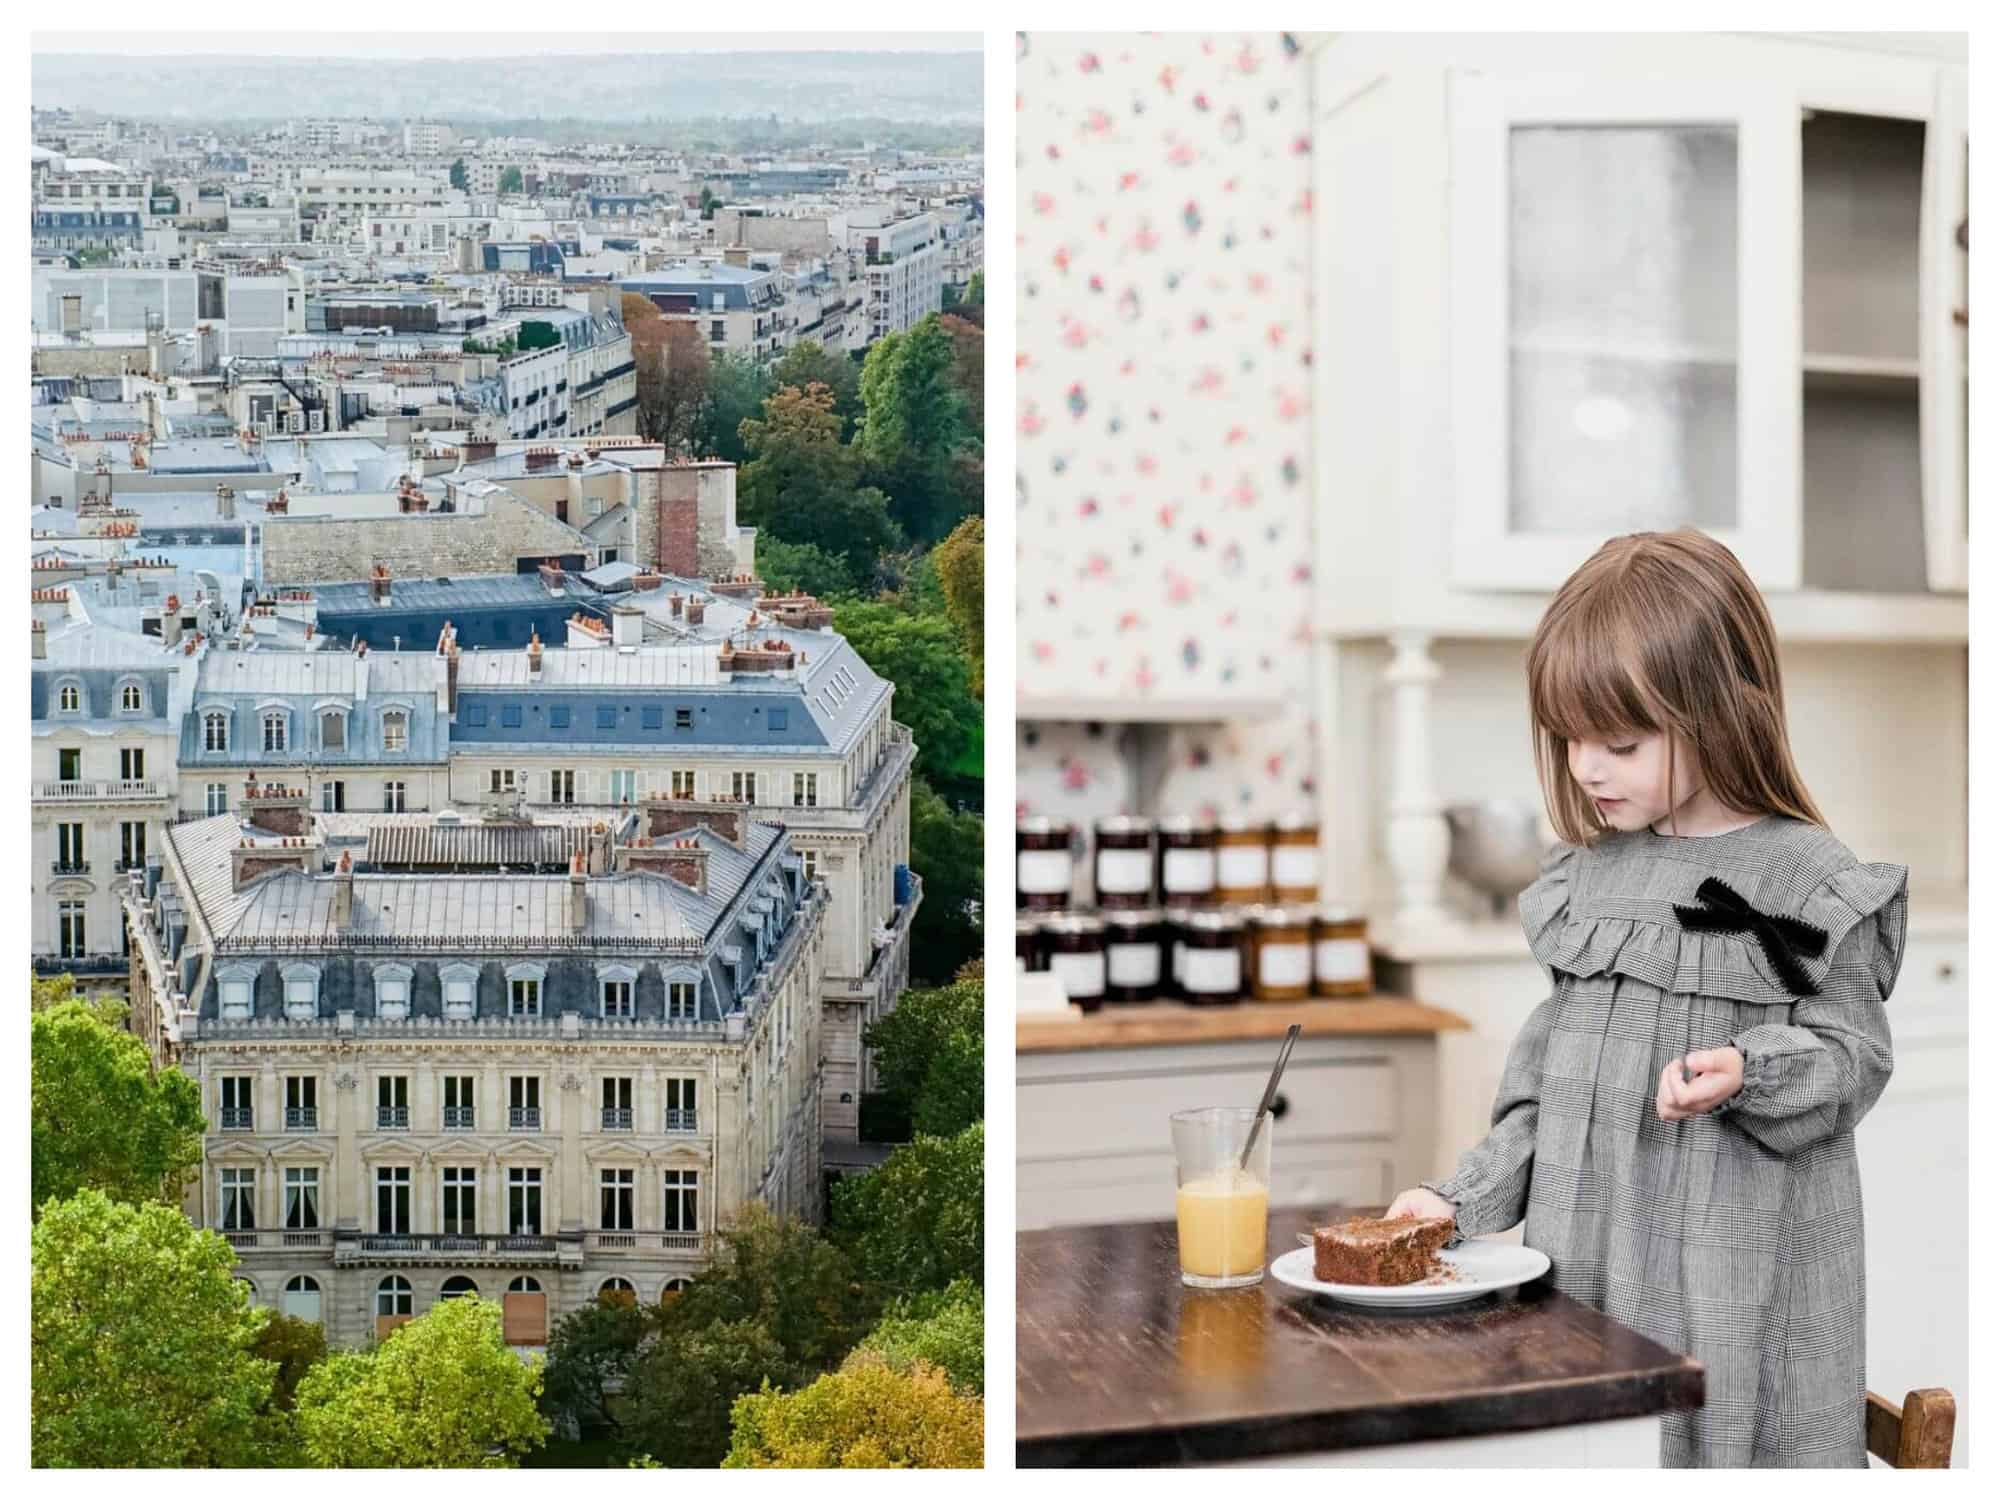 Left: A bird's eye view of Parisian apartments, their zinc rooftops, and brown chimneys. Right: A girl in a gray dress and her brown cake and orange juice.